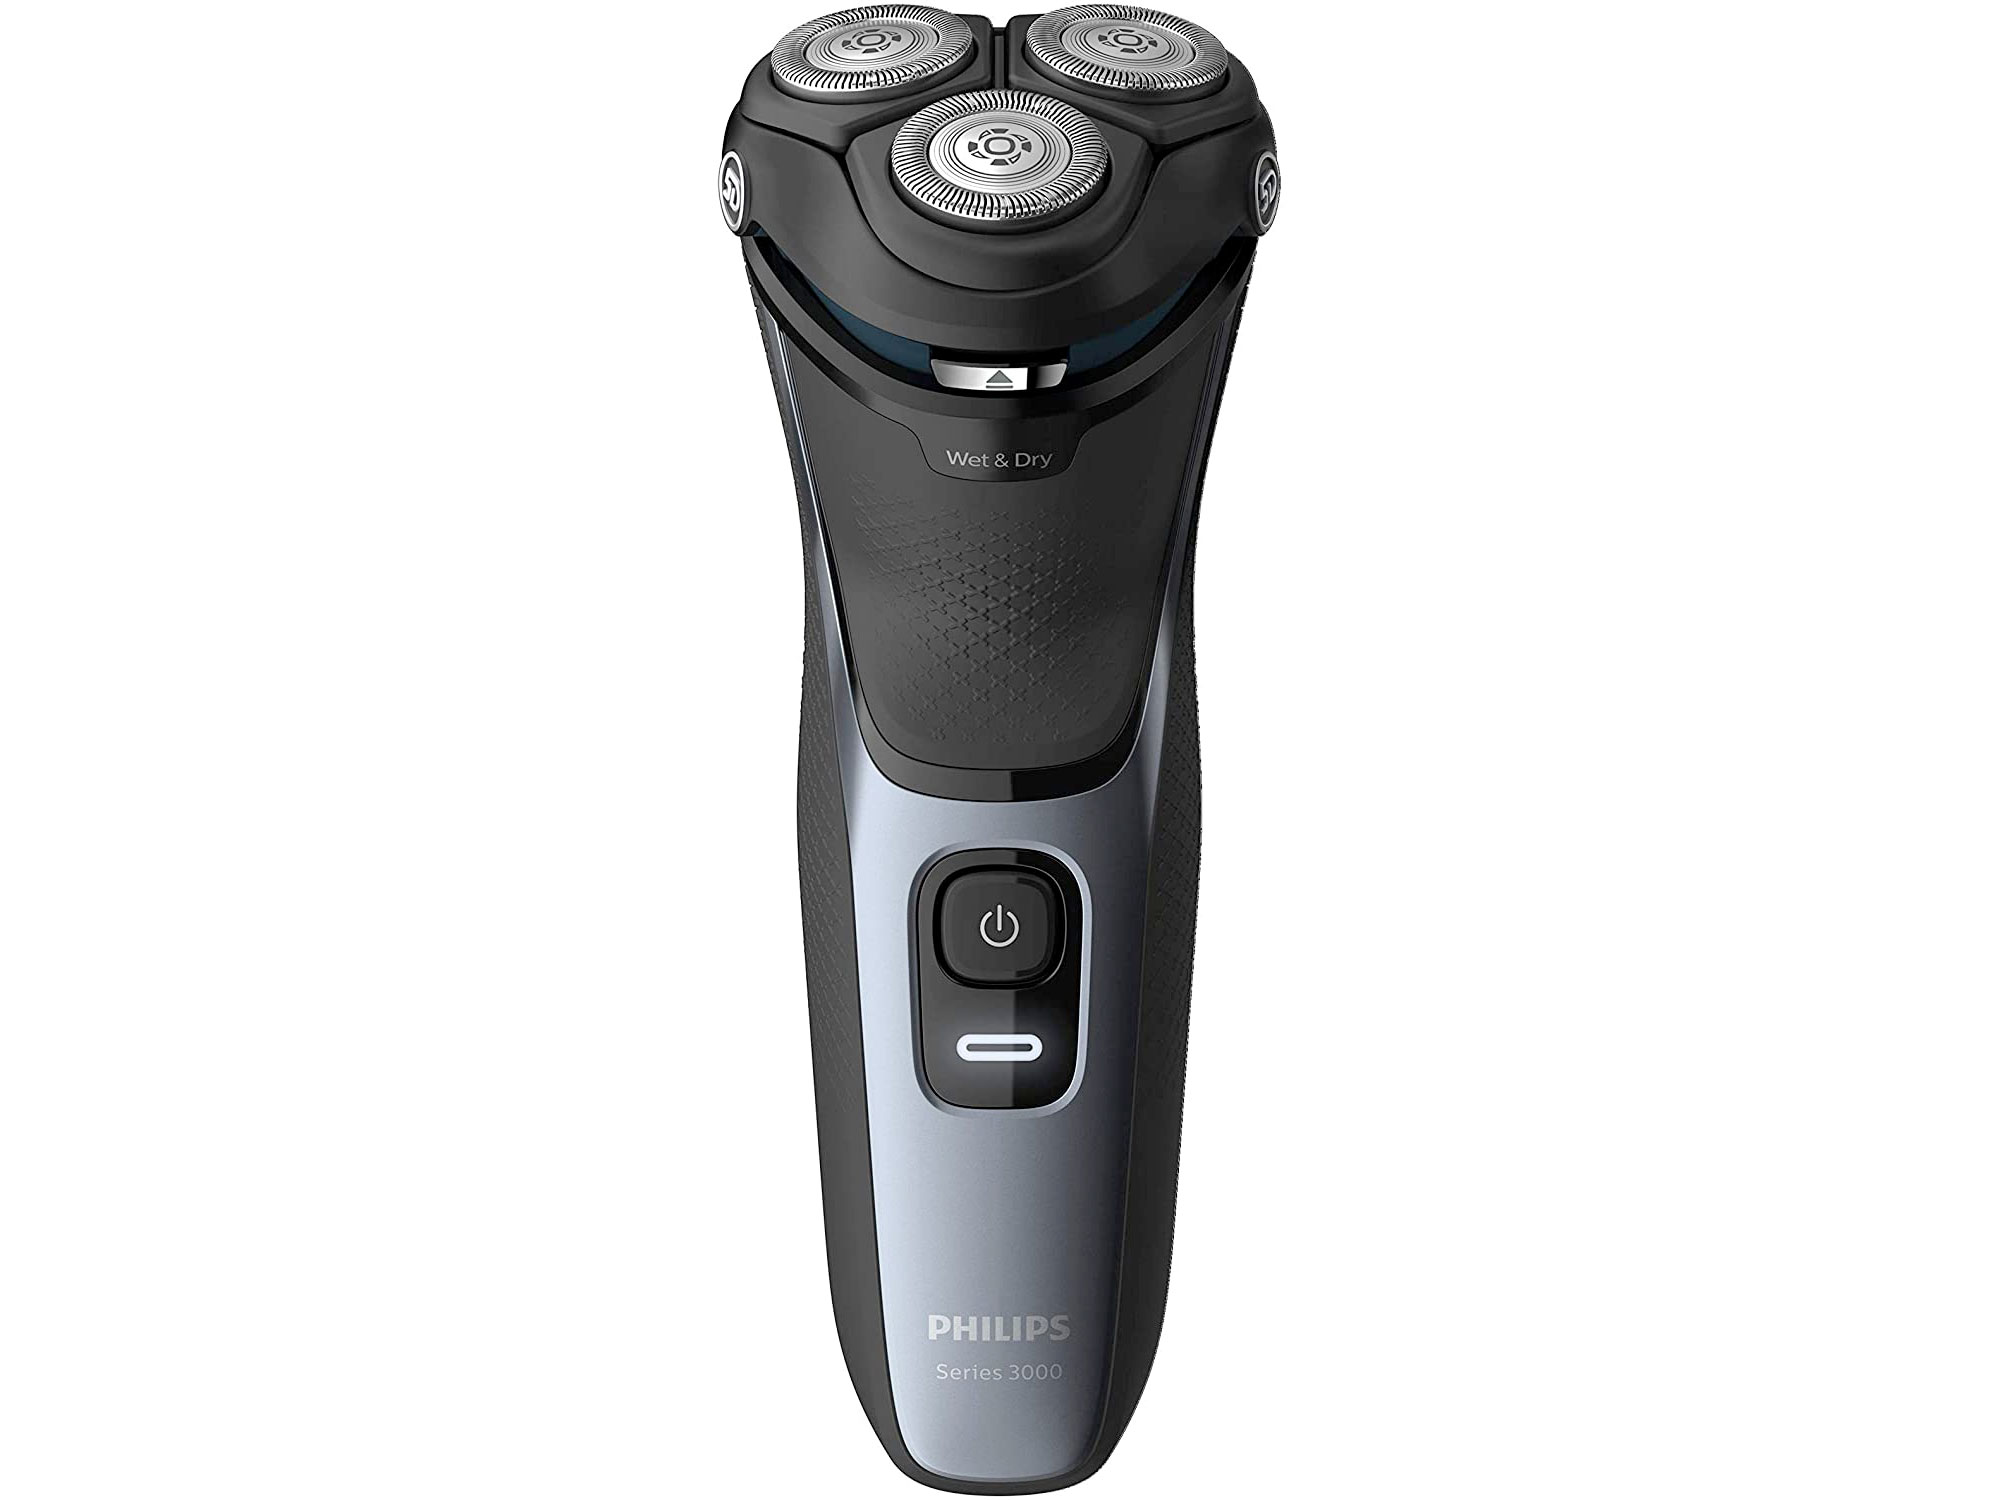 Amazon：Philips Shaver Series 3000 with Pop-Up Trimmer只卖$49.20